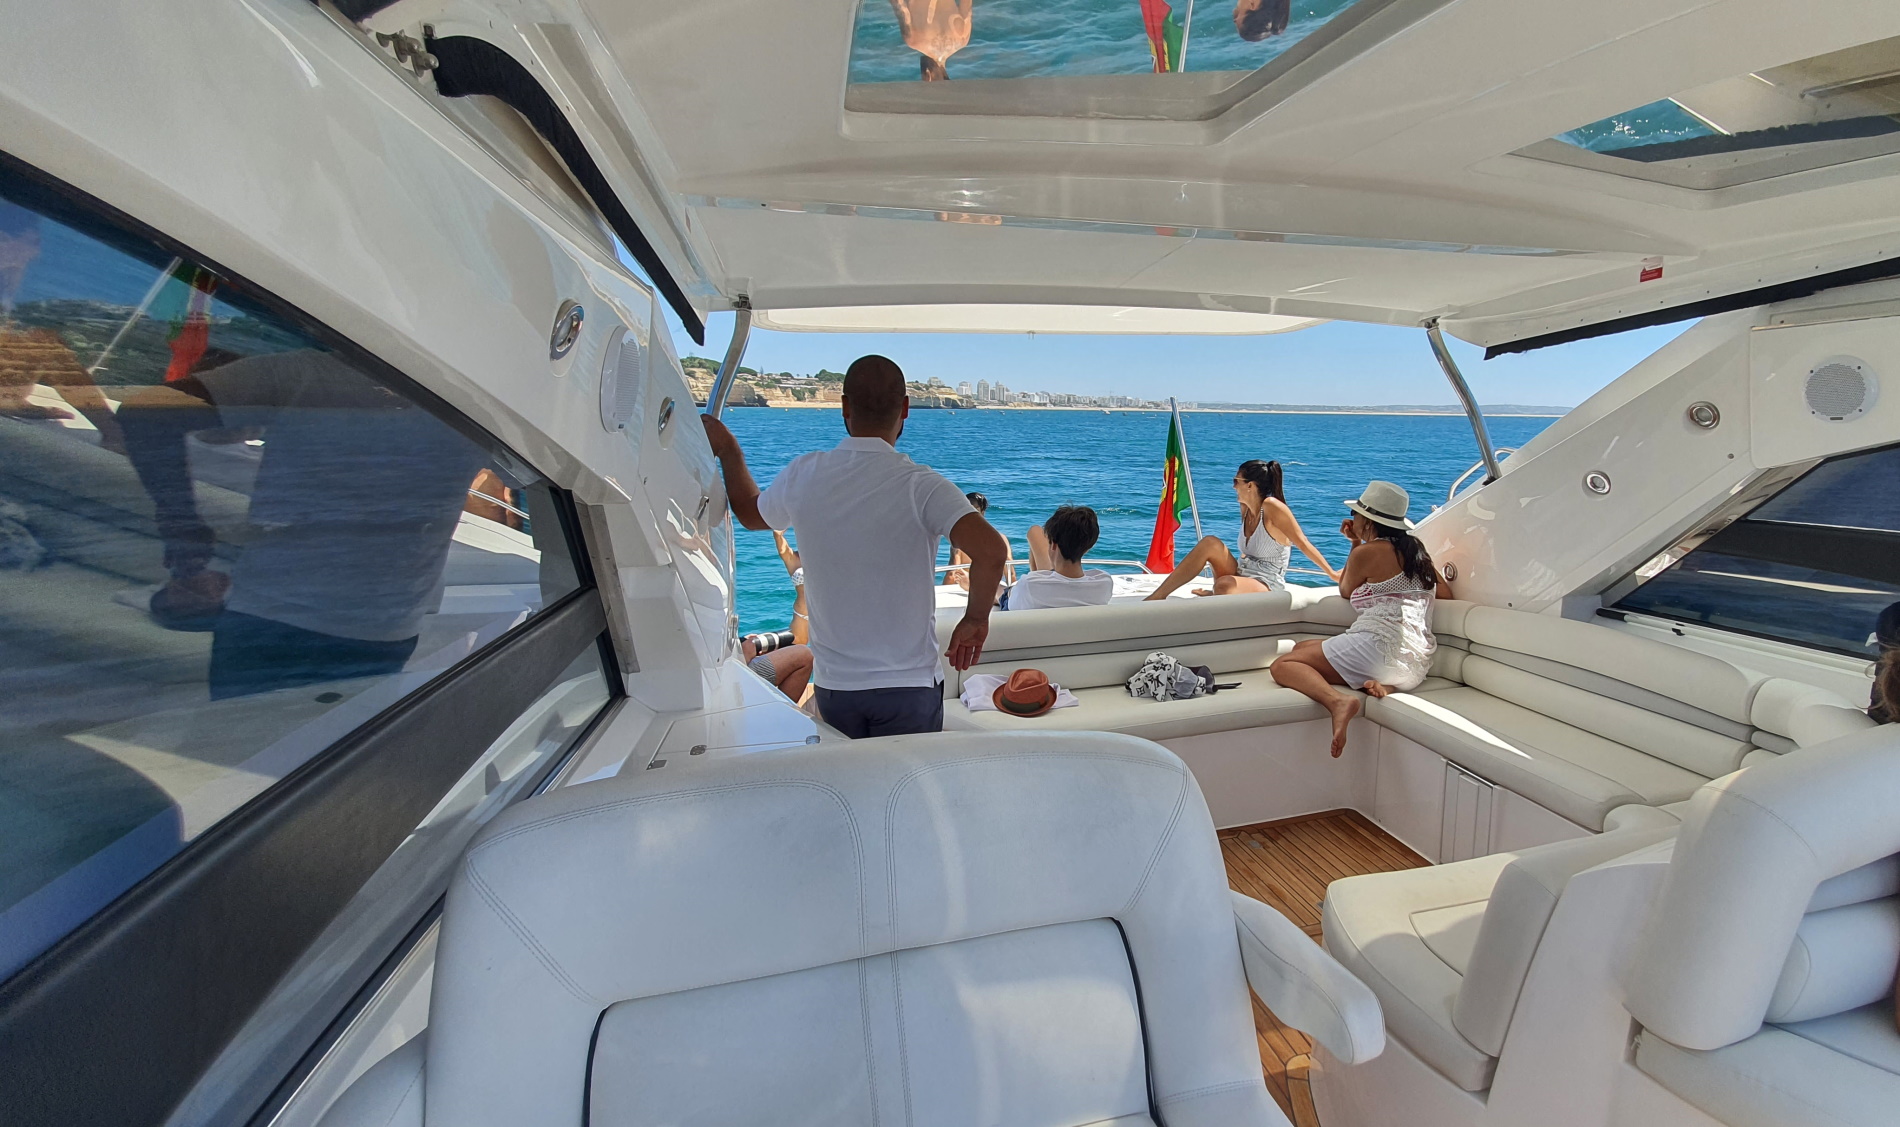 Enjoy the view from your yacht in Albufeira